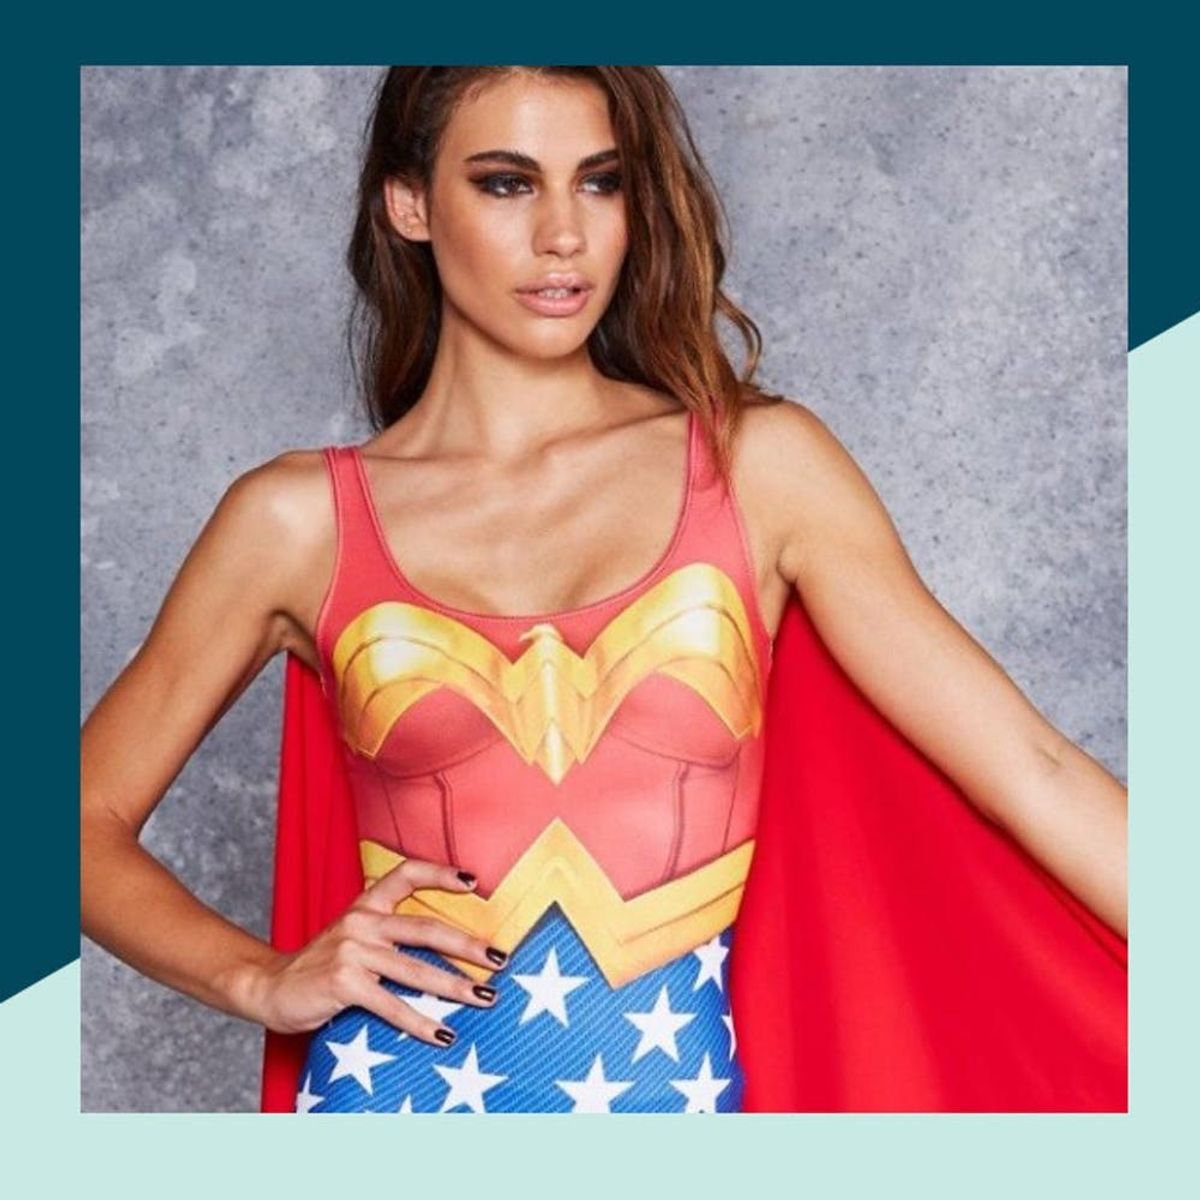 Channel Your Inner Wonder Woman With These Kick-ass Looks